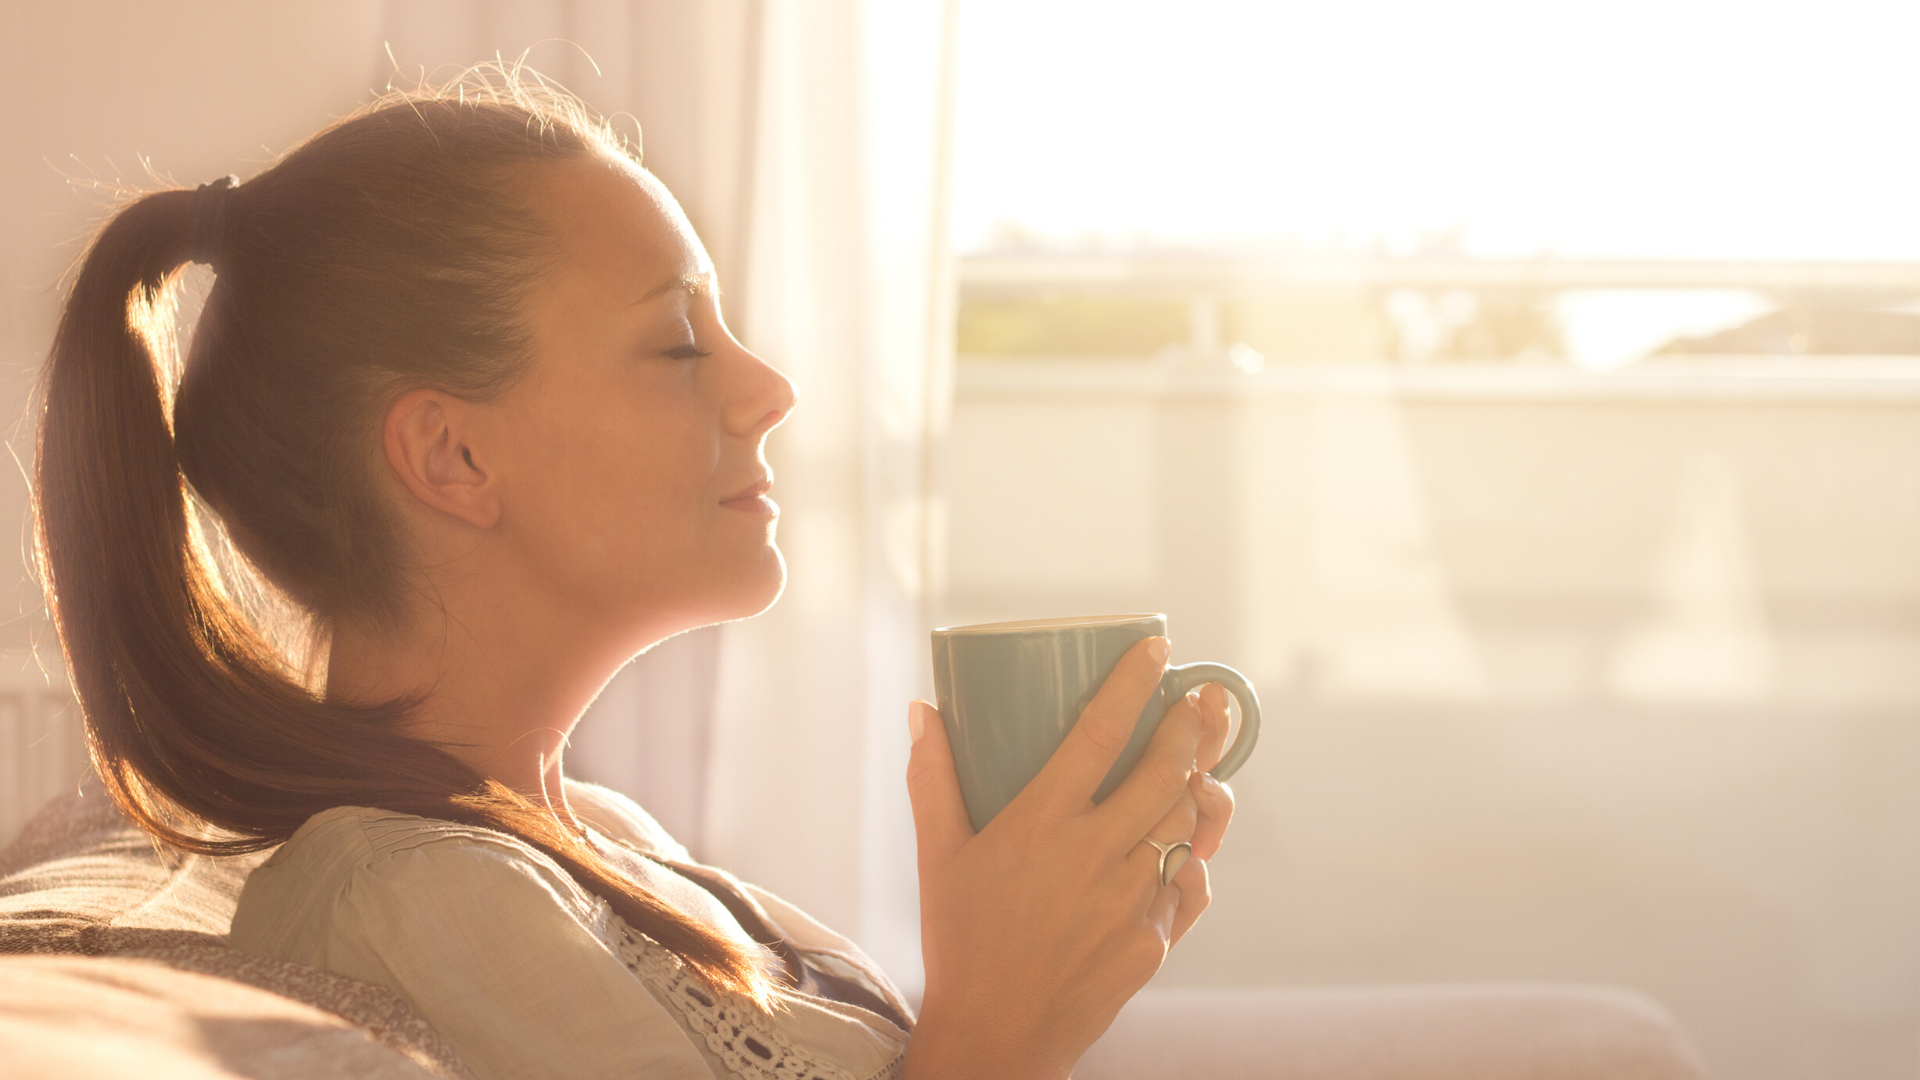 You may be surprised that changing your morning habits can have such a profound impact on your day.  While you might like to stay in bed under the covers in the winter, 